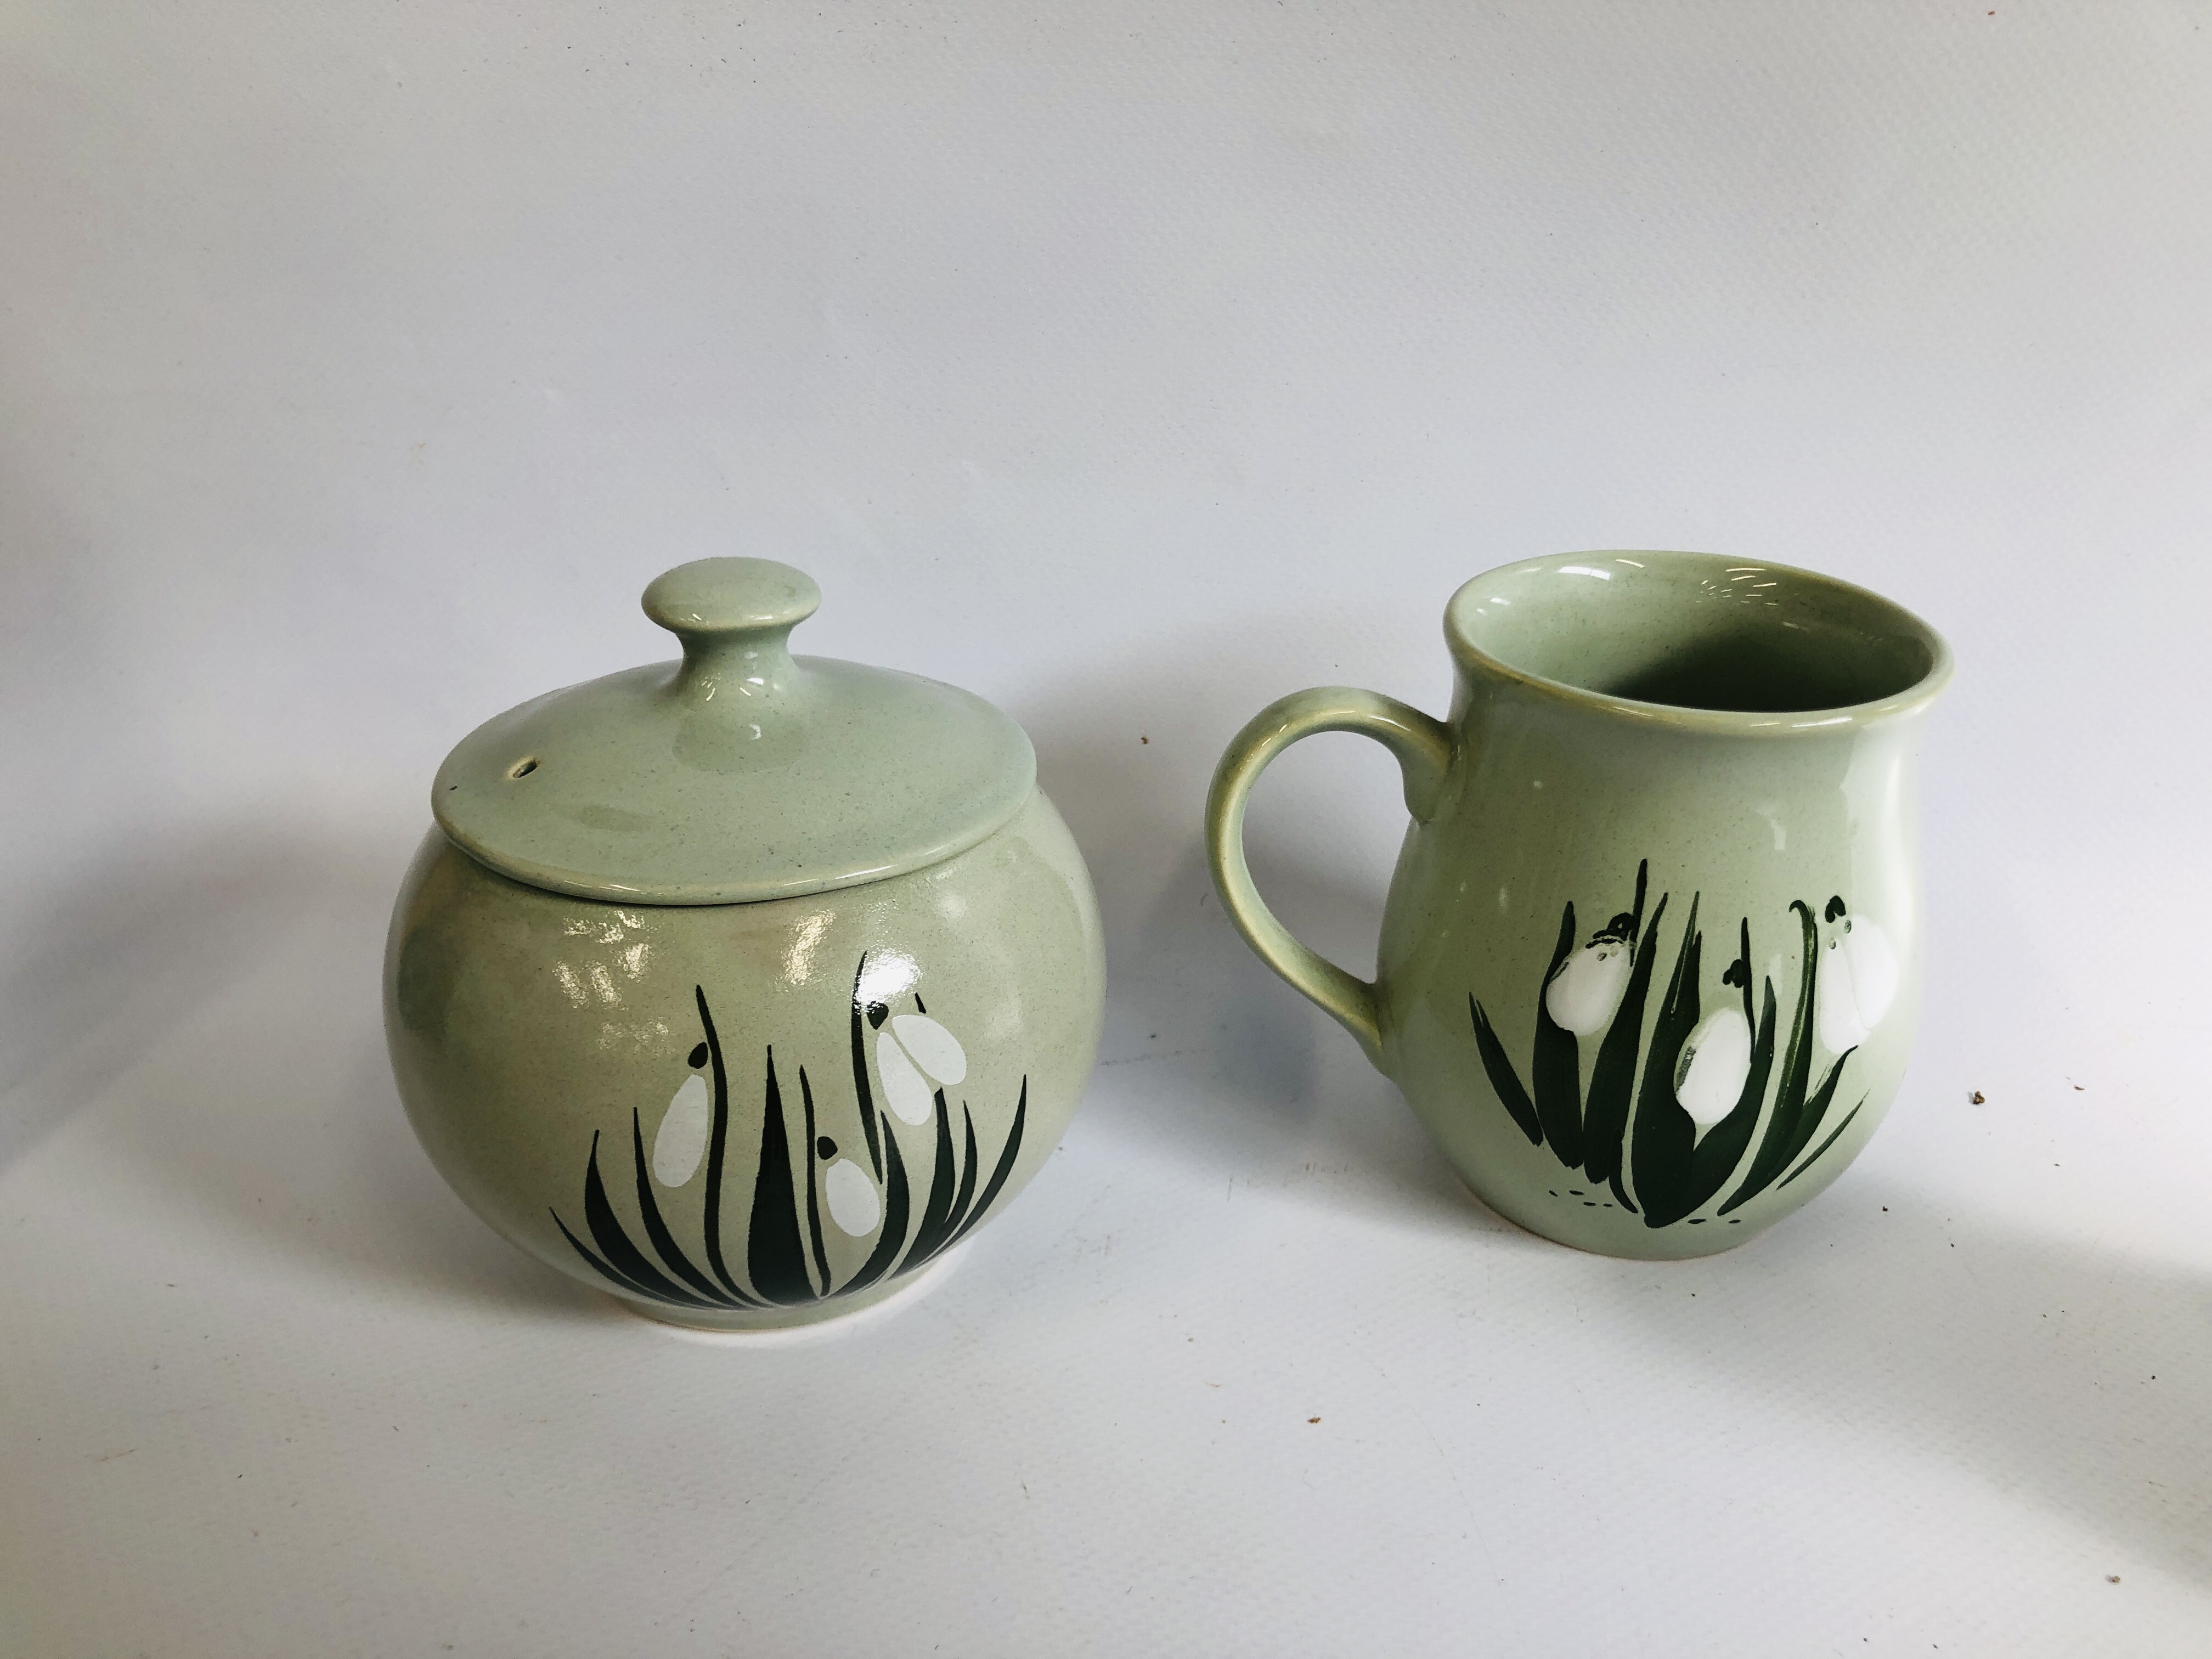 A COLLECTION OF 12 PIECES OF HOLKHAM POTTERY IN THE SNOW DROP DESIGN TO INCLUDE 9 COFFEE MUGS, - Image 3 of 5